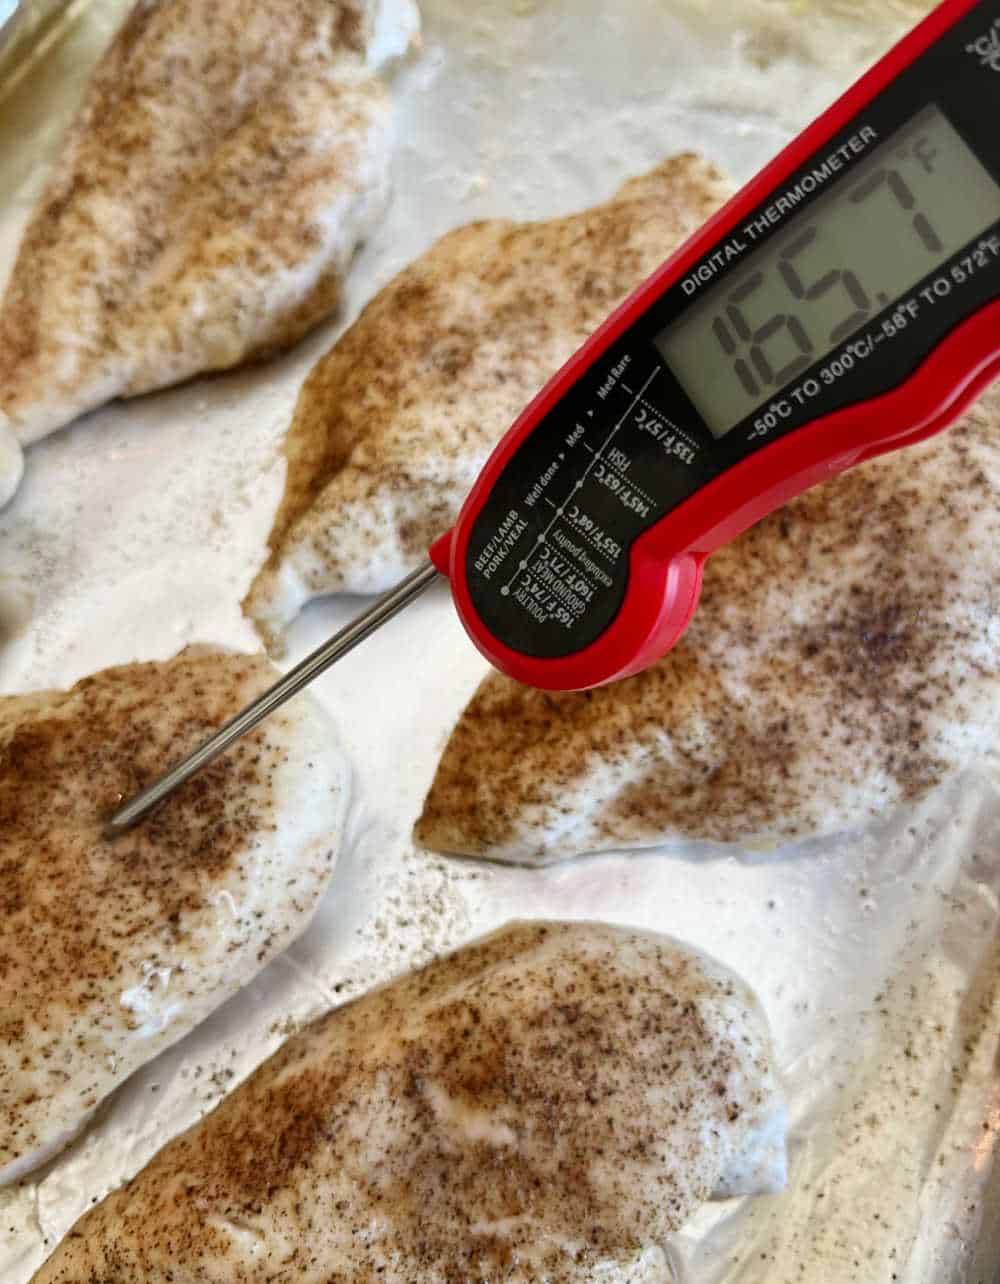 check internal temperature of cooked chicken.